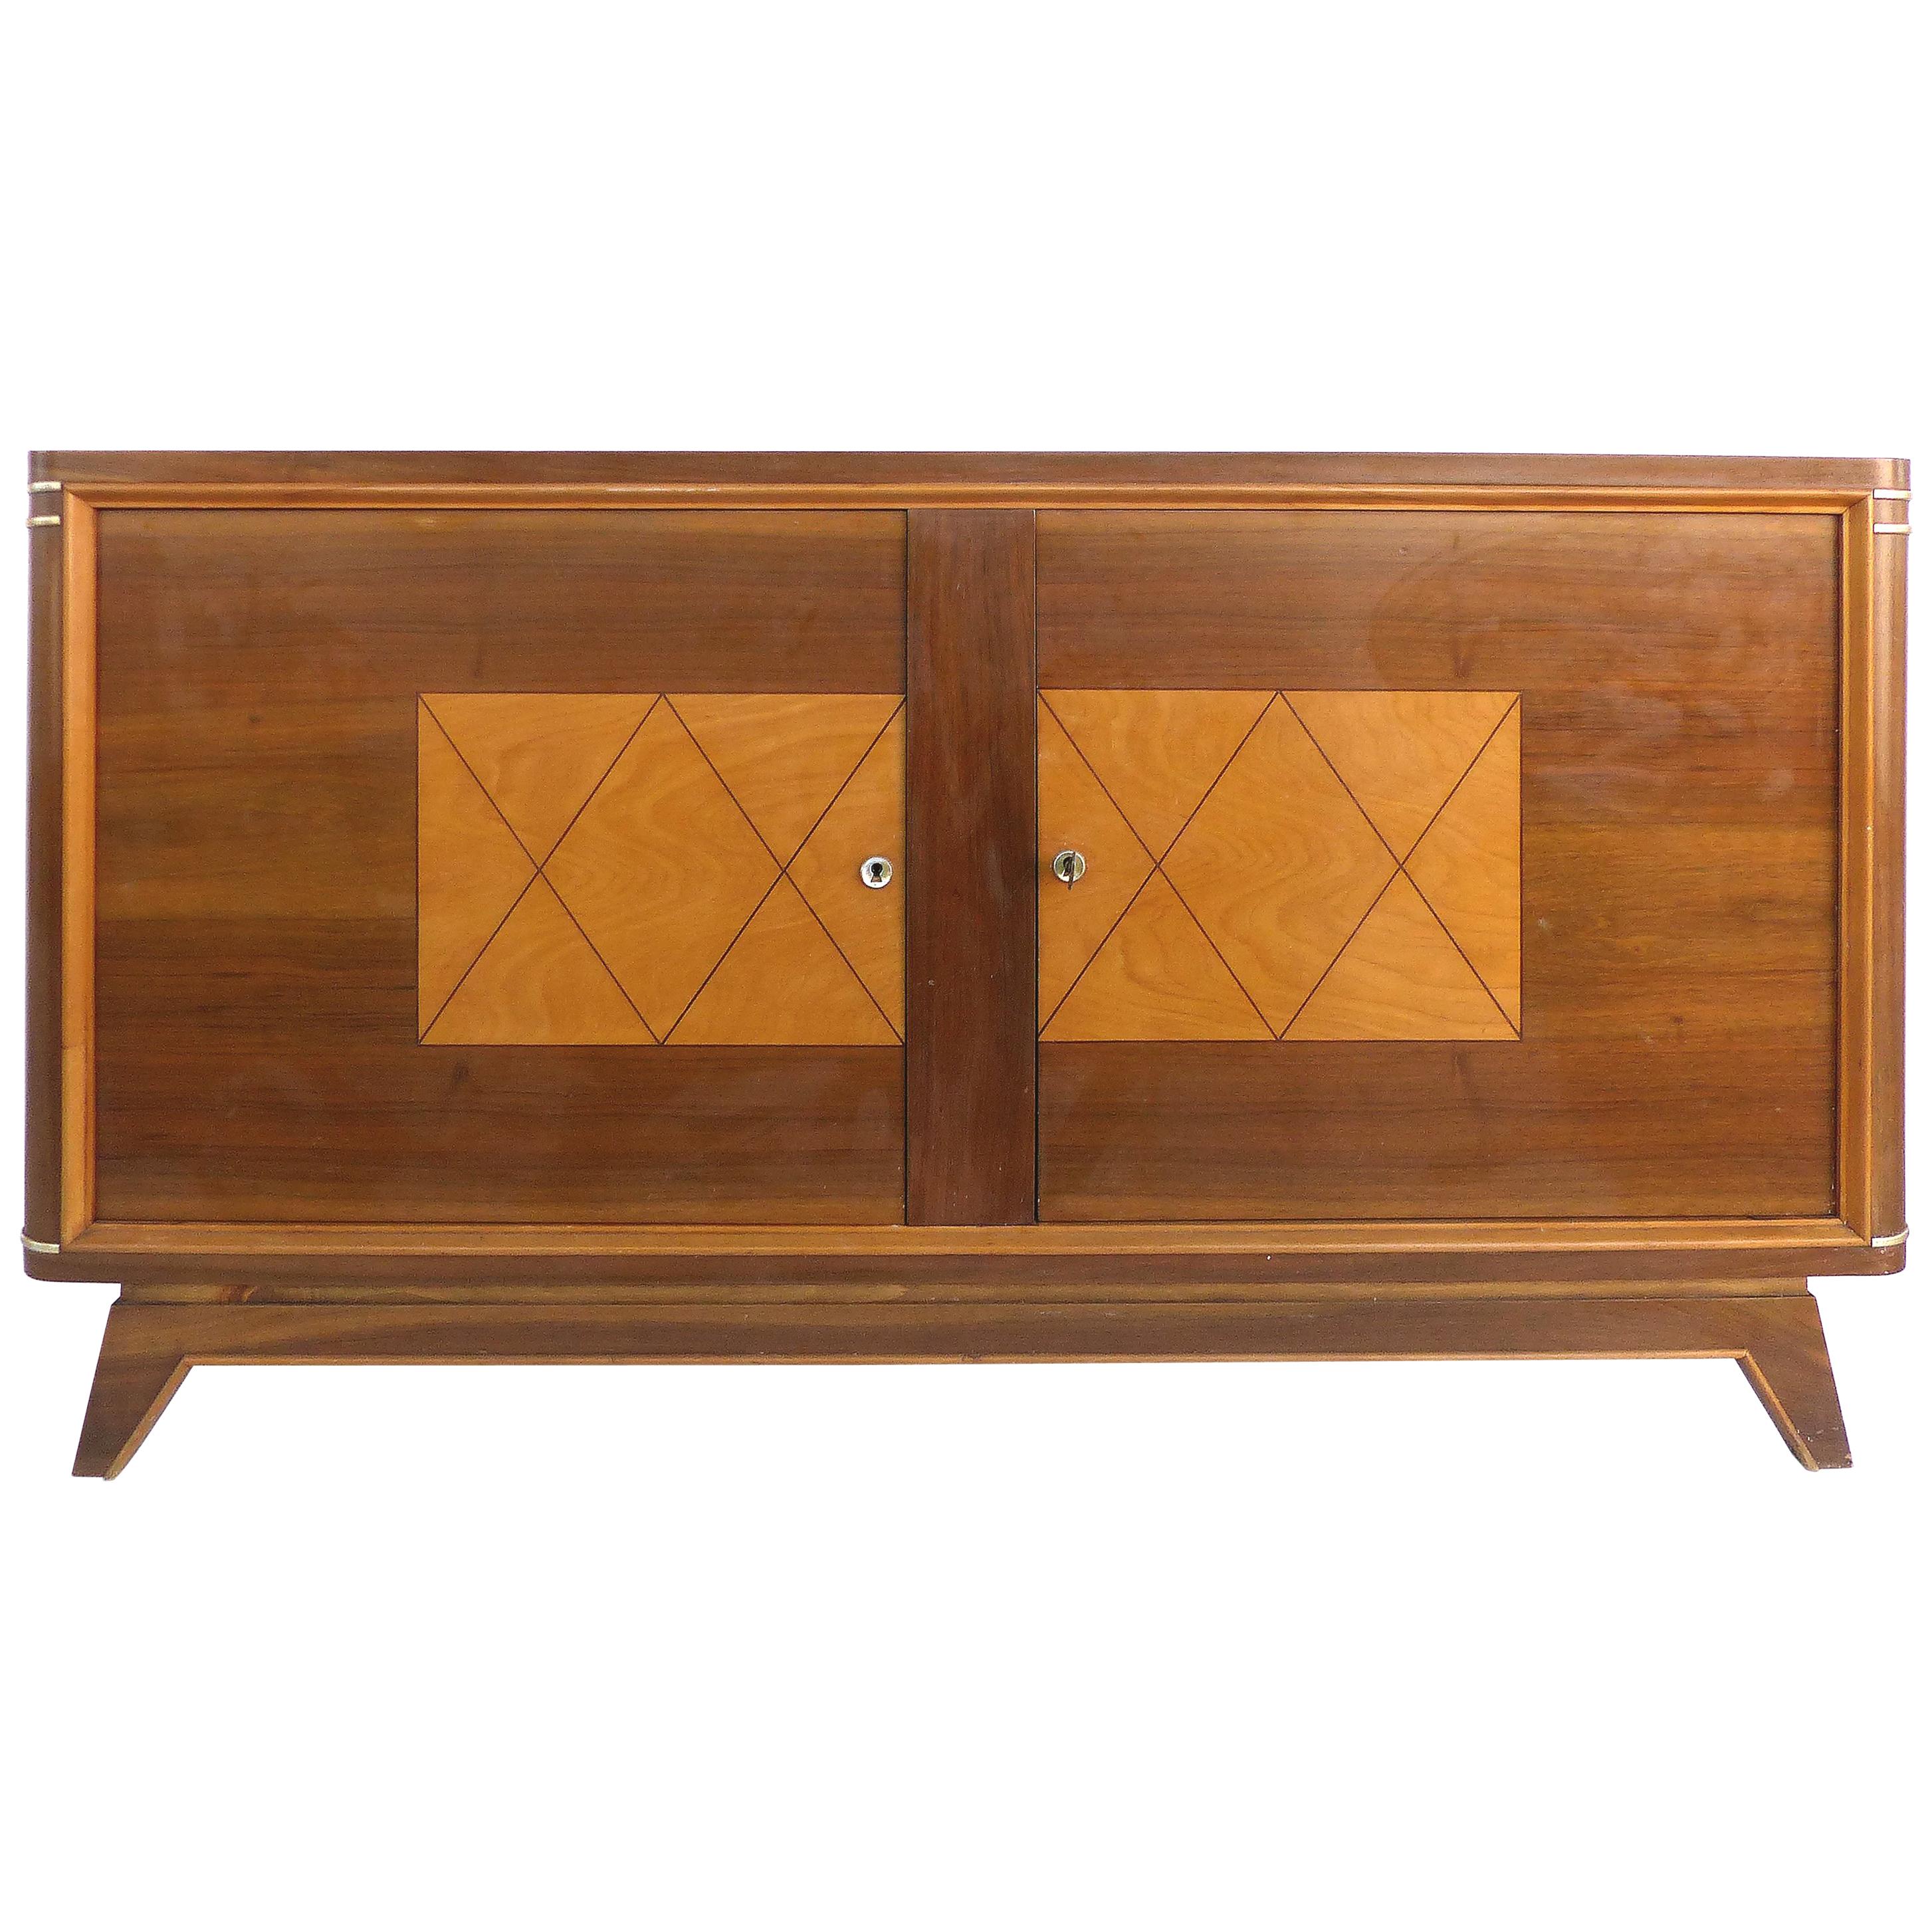 Wooden Art Deco Credenza with Two-Tone Pattern Doors